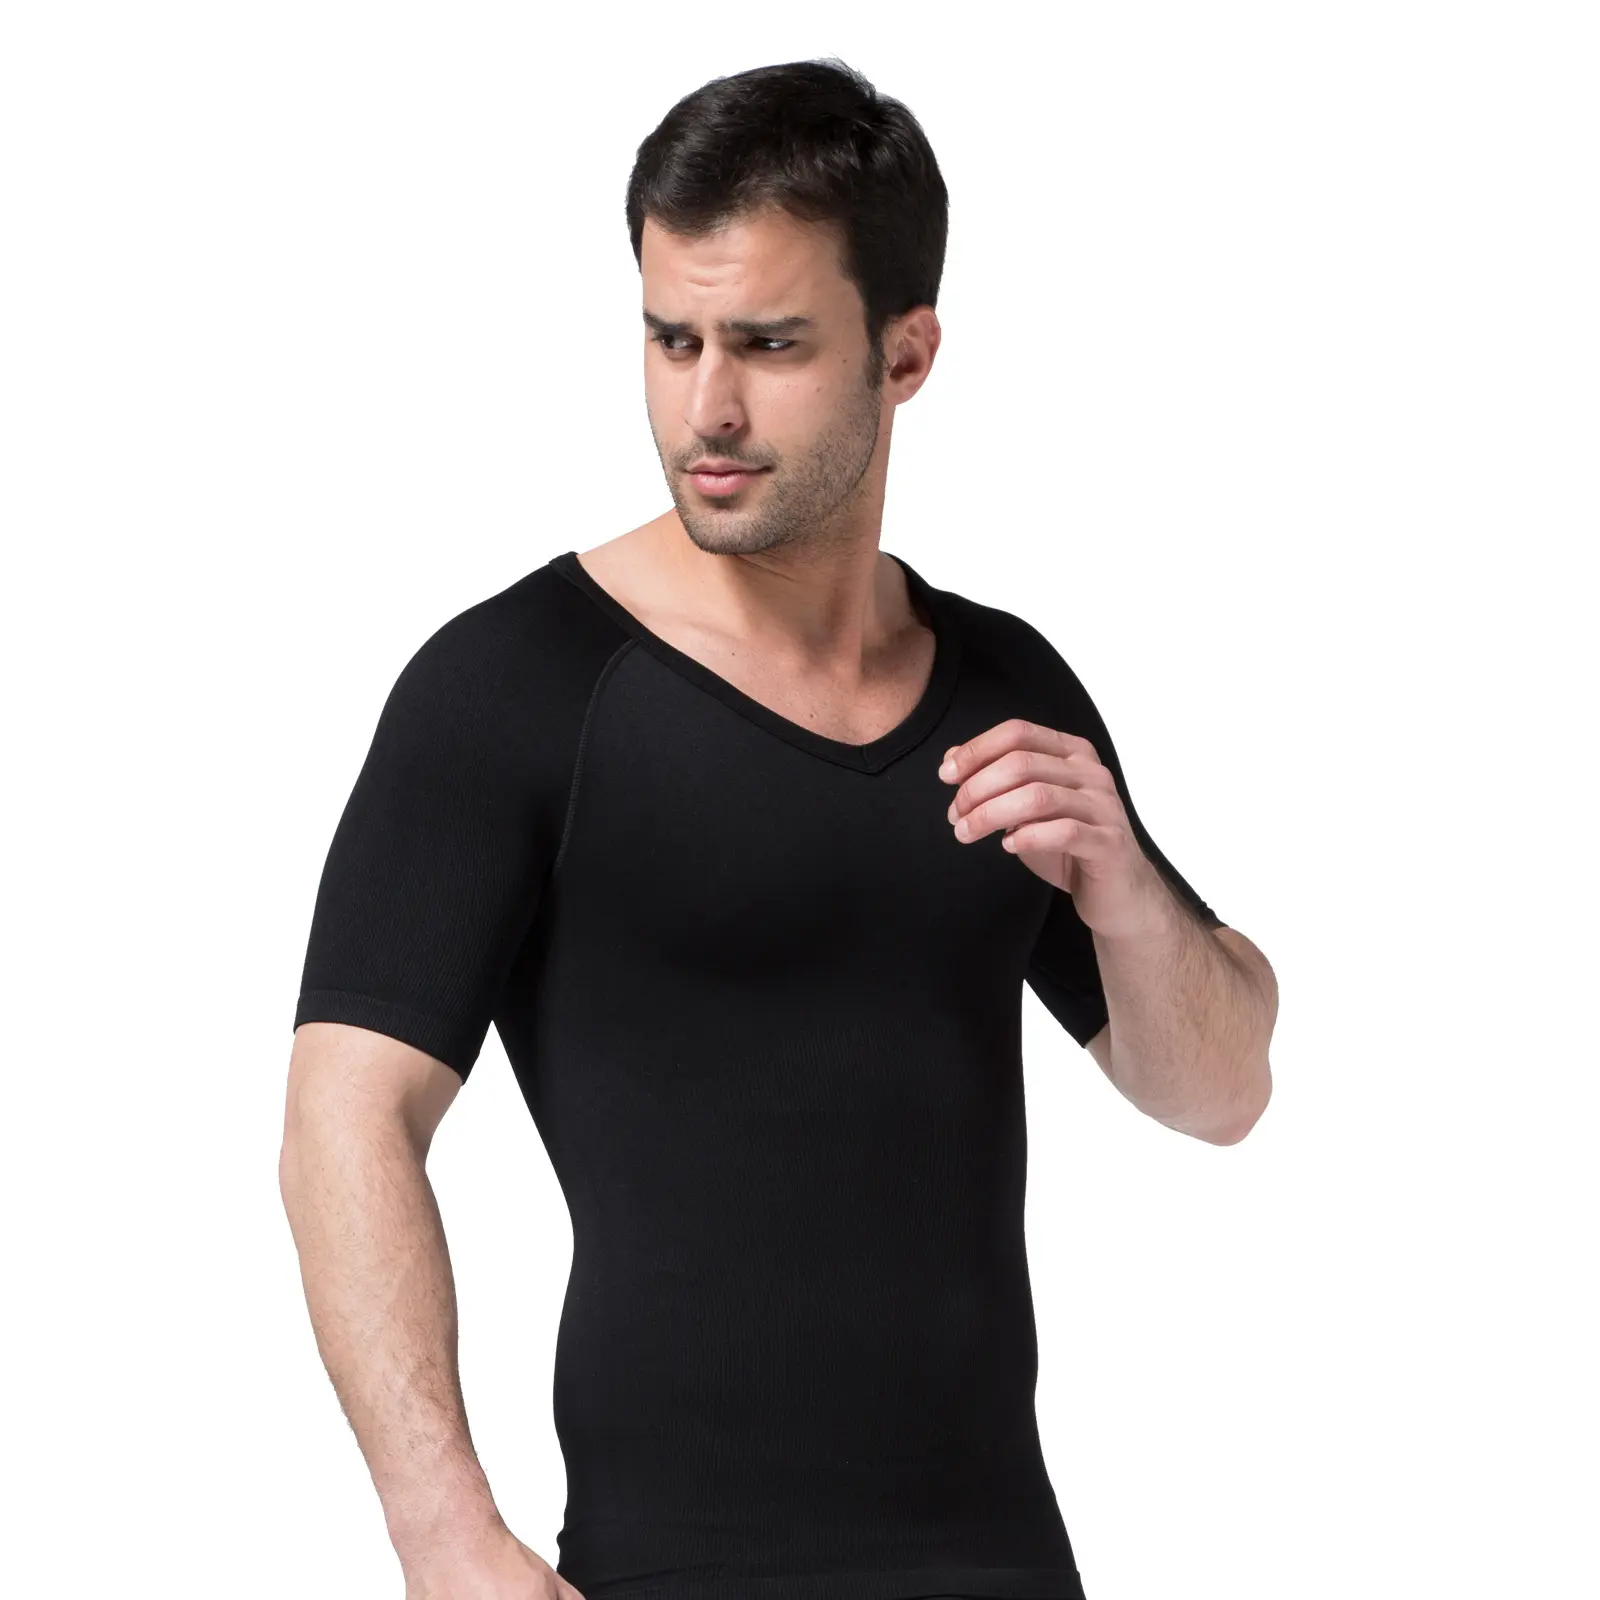 Men's V neck compression T-shirt fitness tummy control workout bodysuit short sleeve quick dry muscle top T-shirt